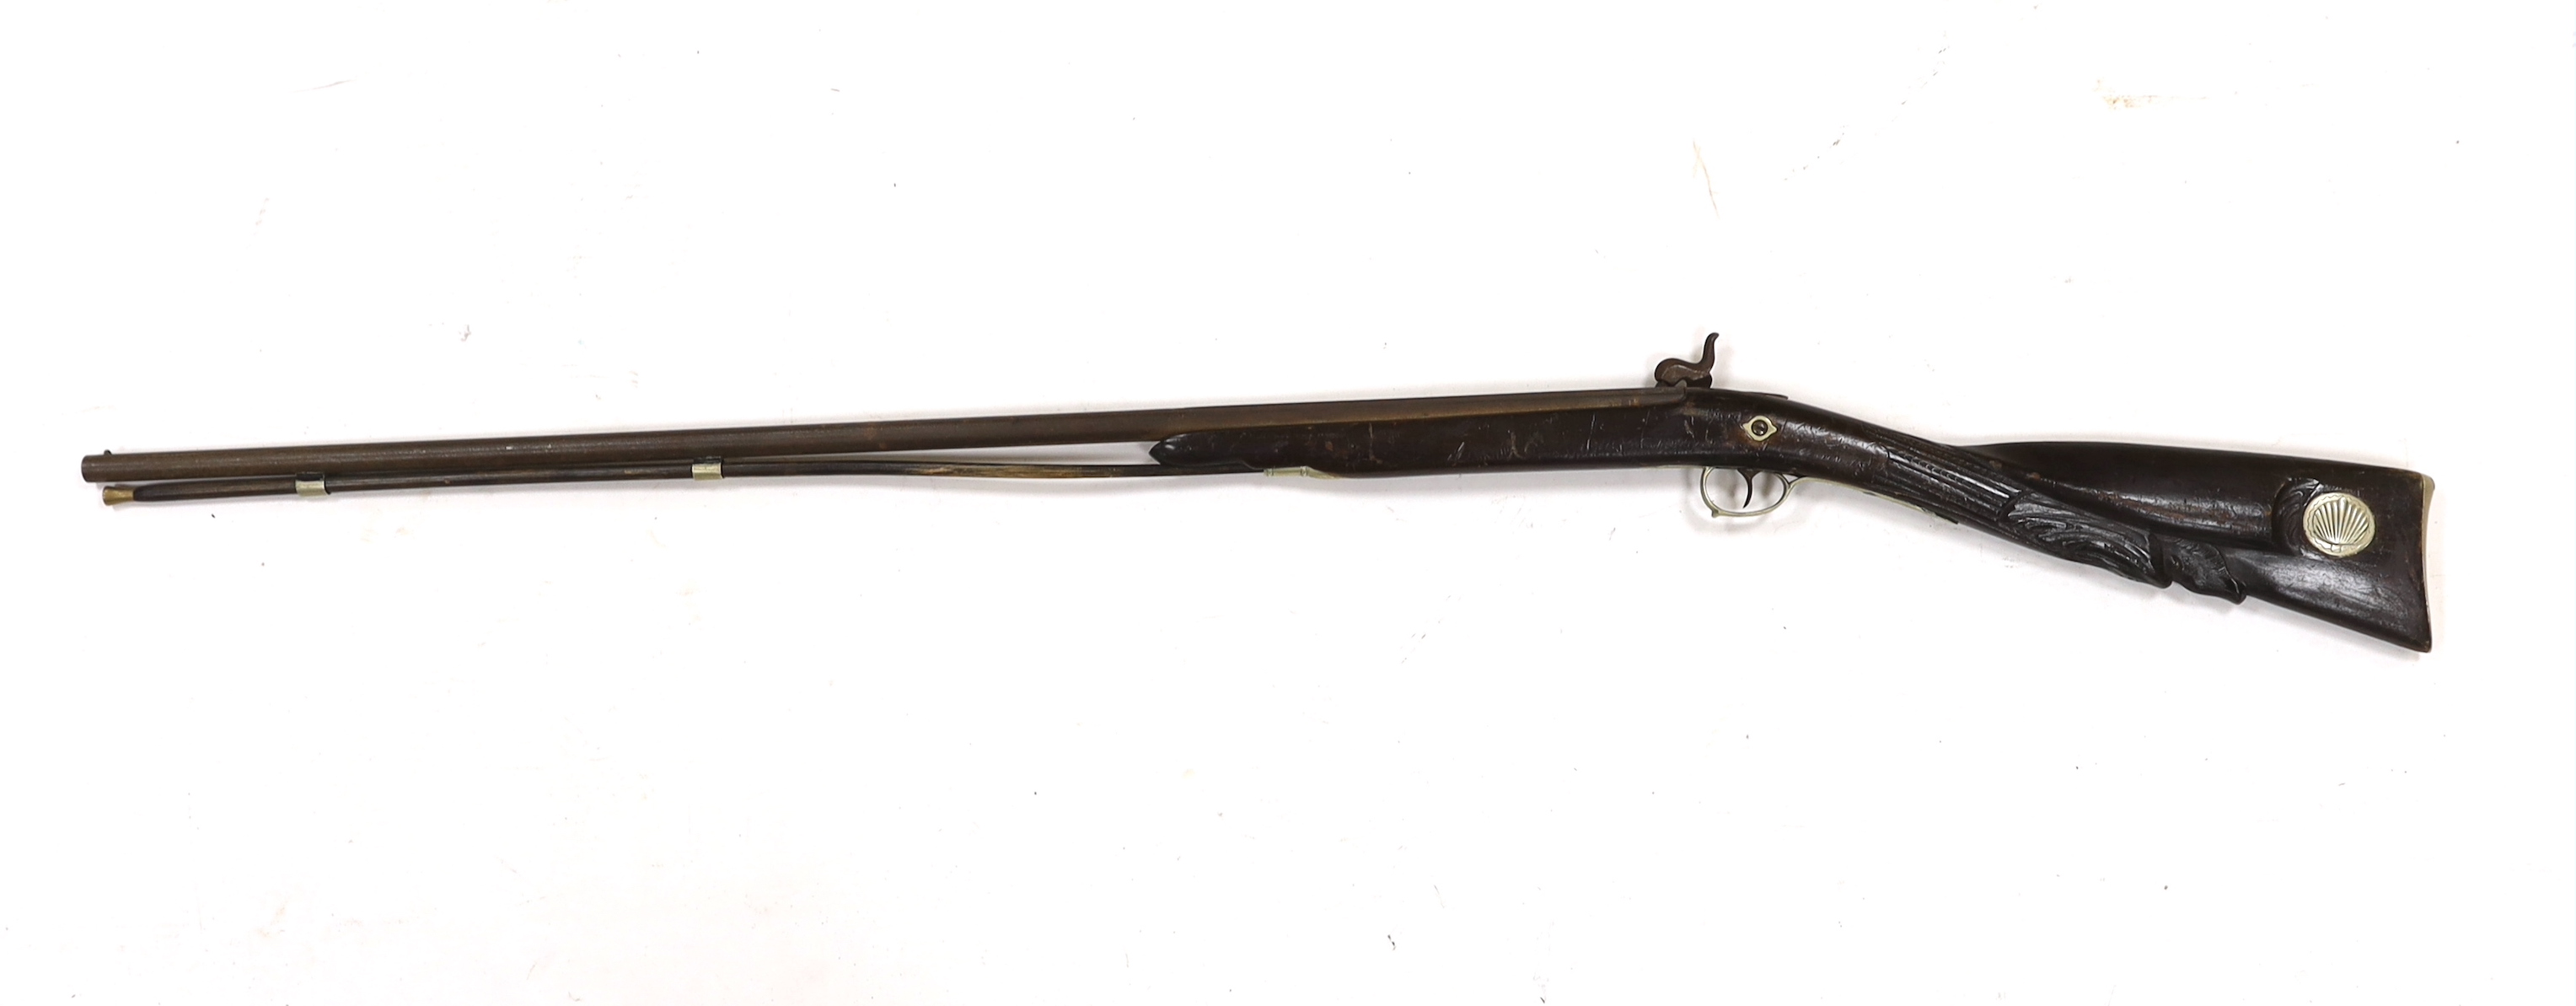 A Belgian back action percussion sporting gun made for the South American market c.1900, with engraved nickel furniture and half stocked barrel, barrel 82cm